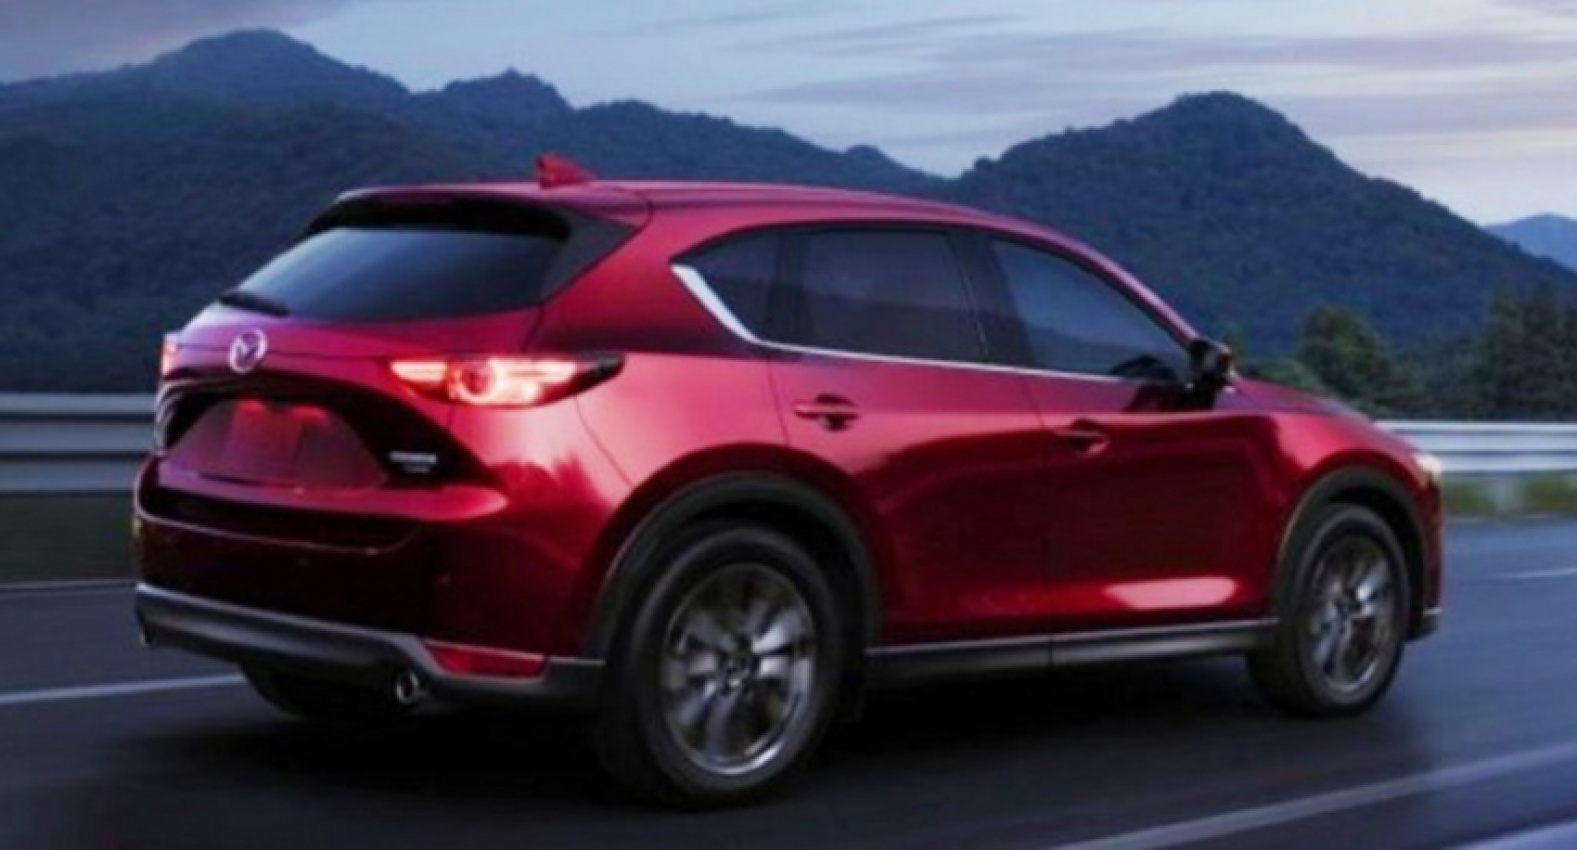 autos, cars, mazda, mazda cx-5, small, midsize and large suv models, how big is the trunk of a mazda cx-5?